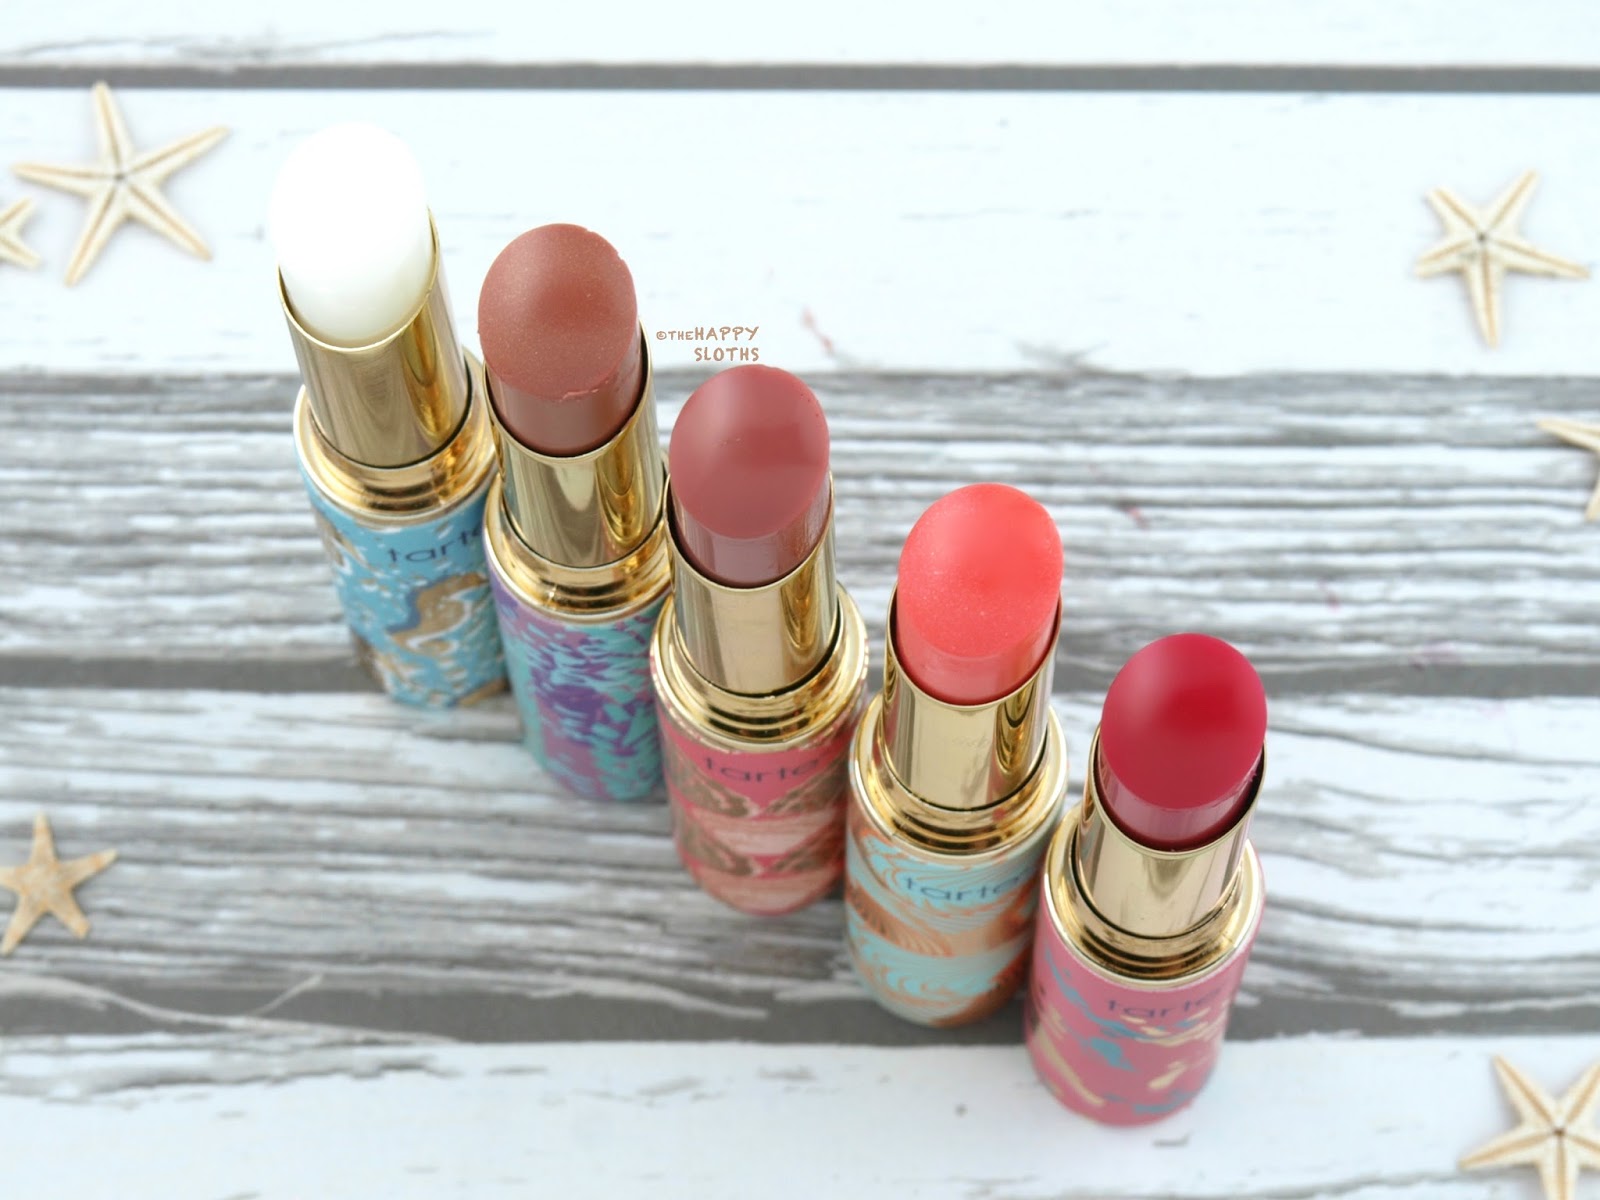 Tarte Rainforest of the Sea Quench Lip Rescue: Review and Swatches